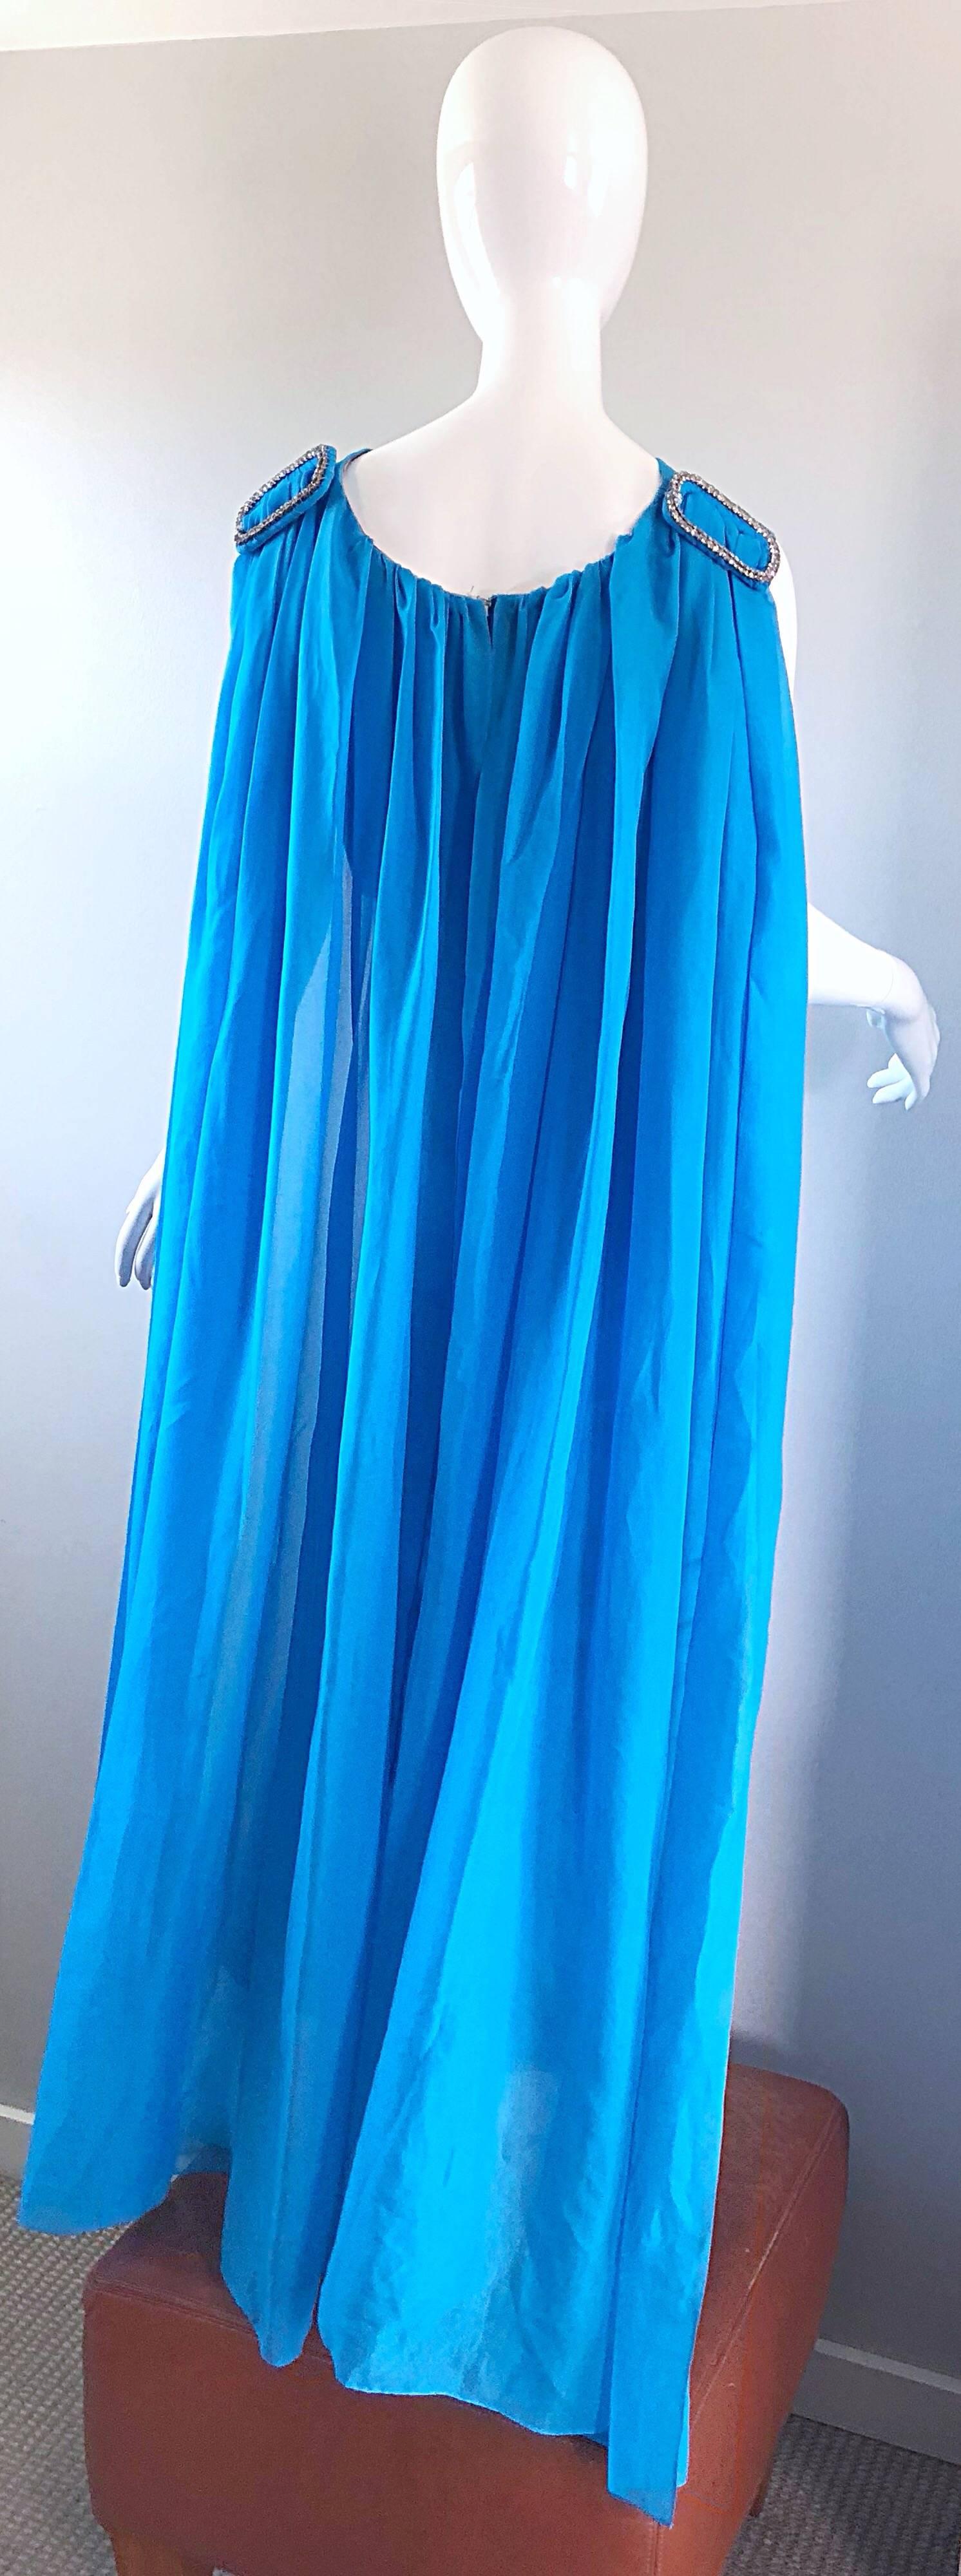 Incredible 1960s Turquoise Blue Chiffon Rhinestone Encrusted Vintage Cape Gown 7